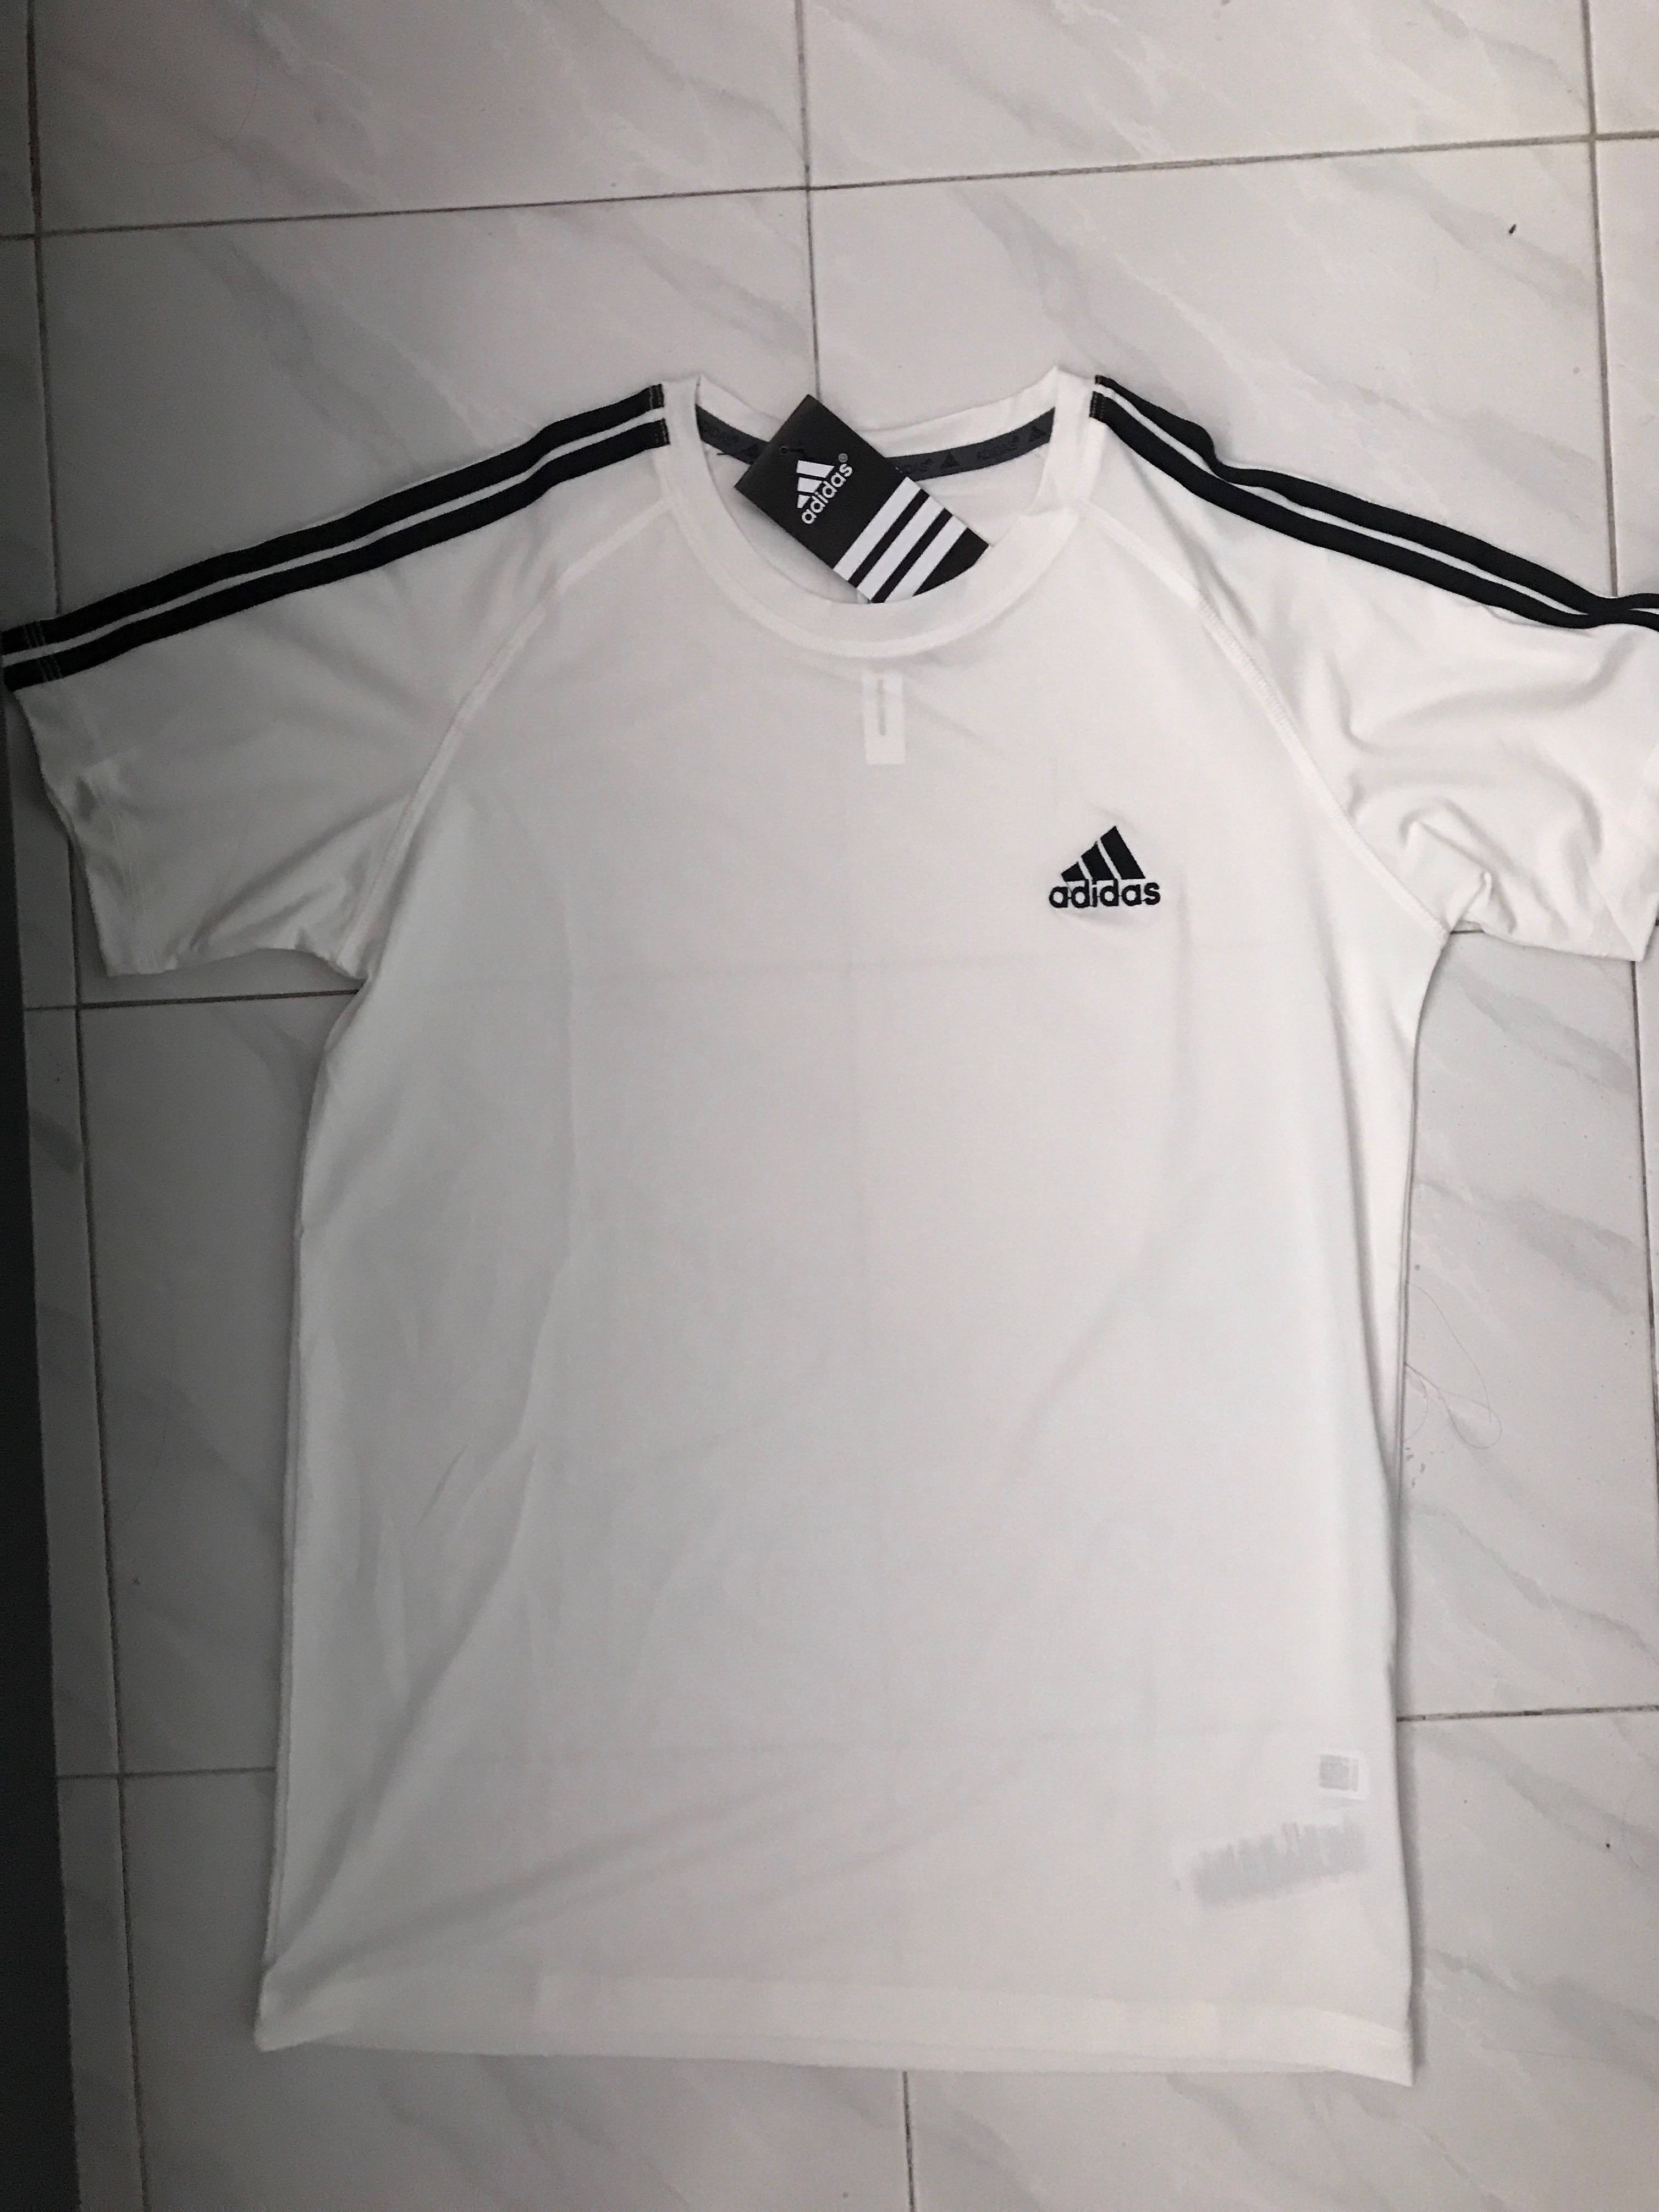 Adidas dryfit top (white with black 